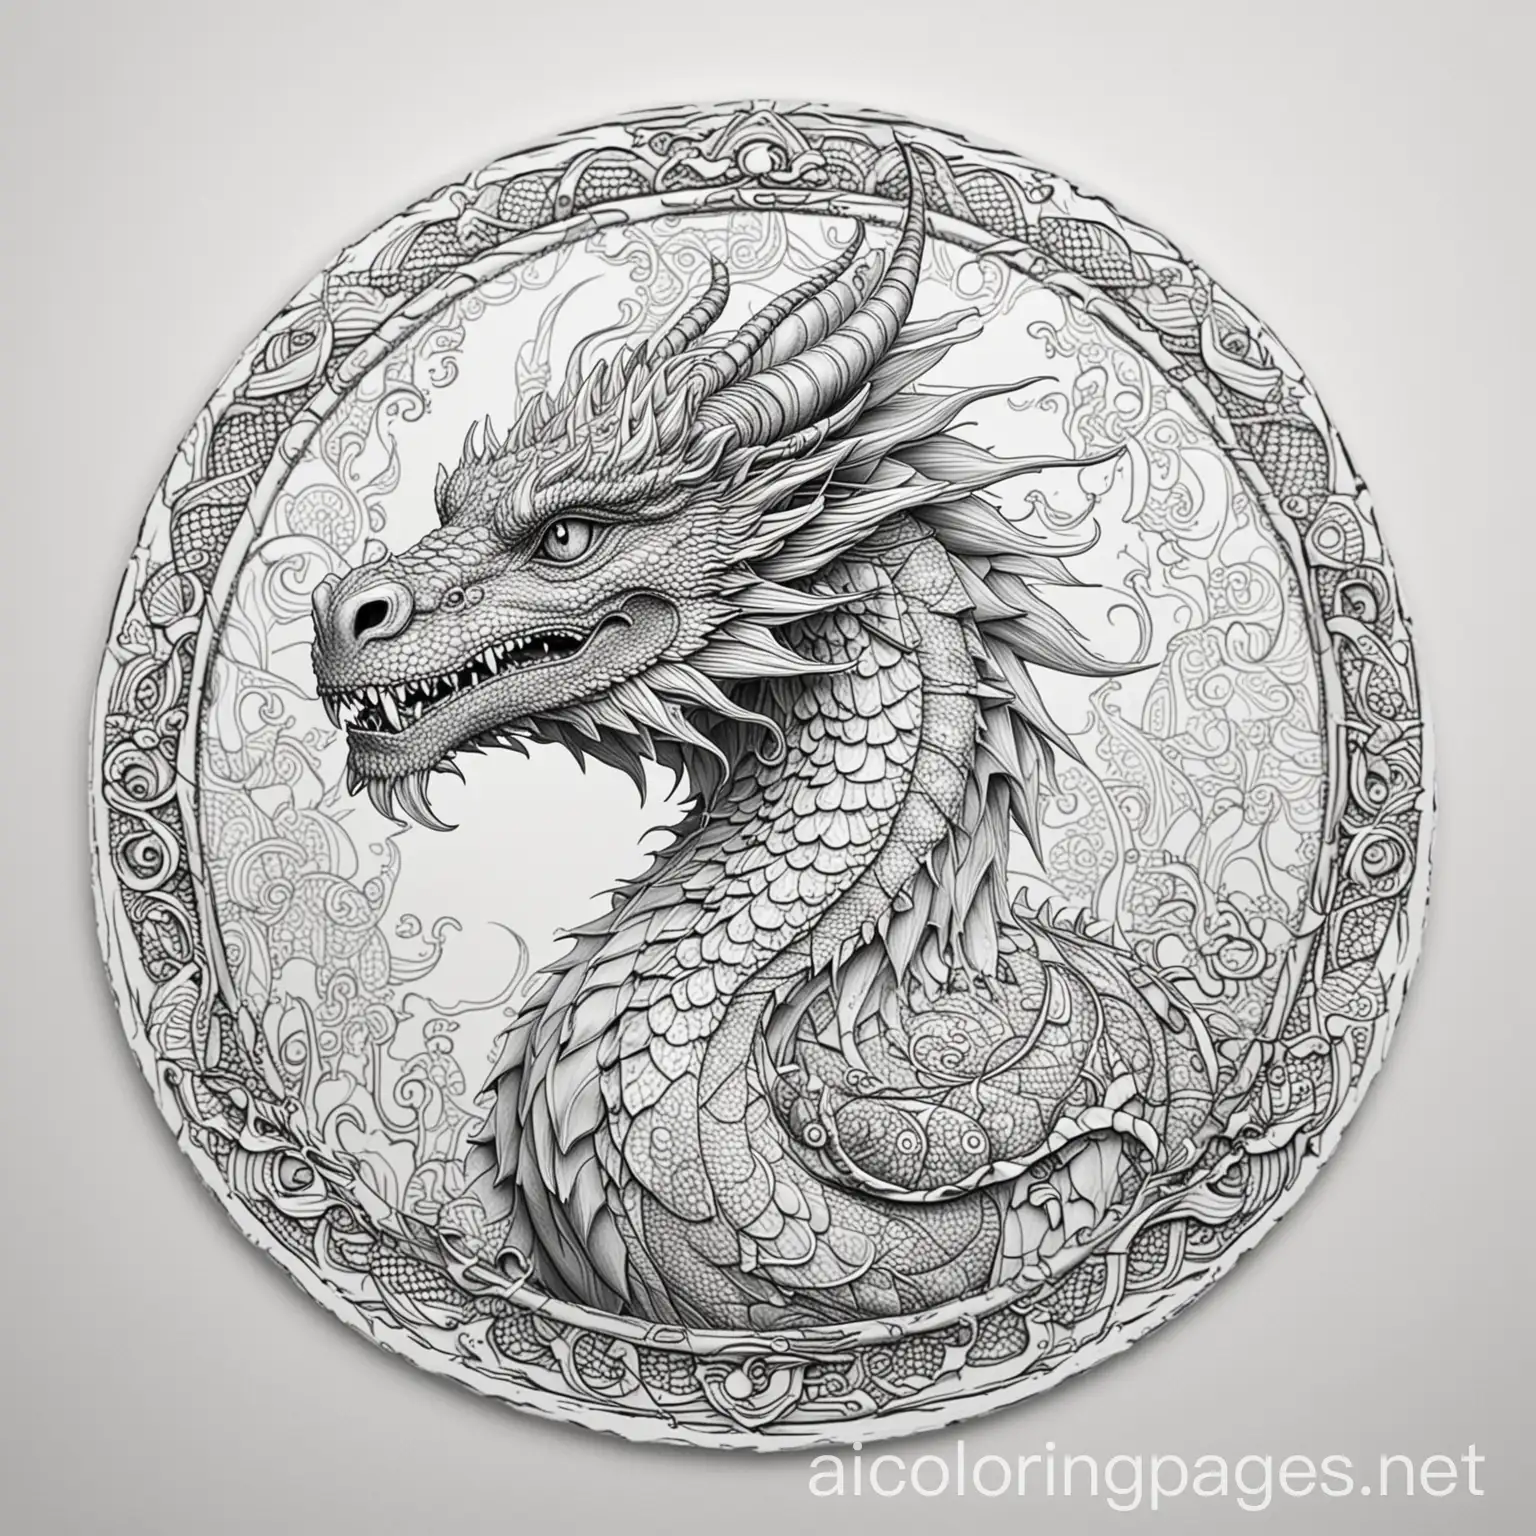 Dragon-Mandala-Coloring-Page-with-Simplicity-and-Ample-White-Space